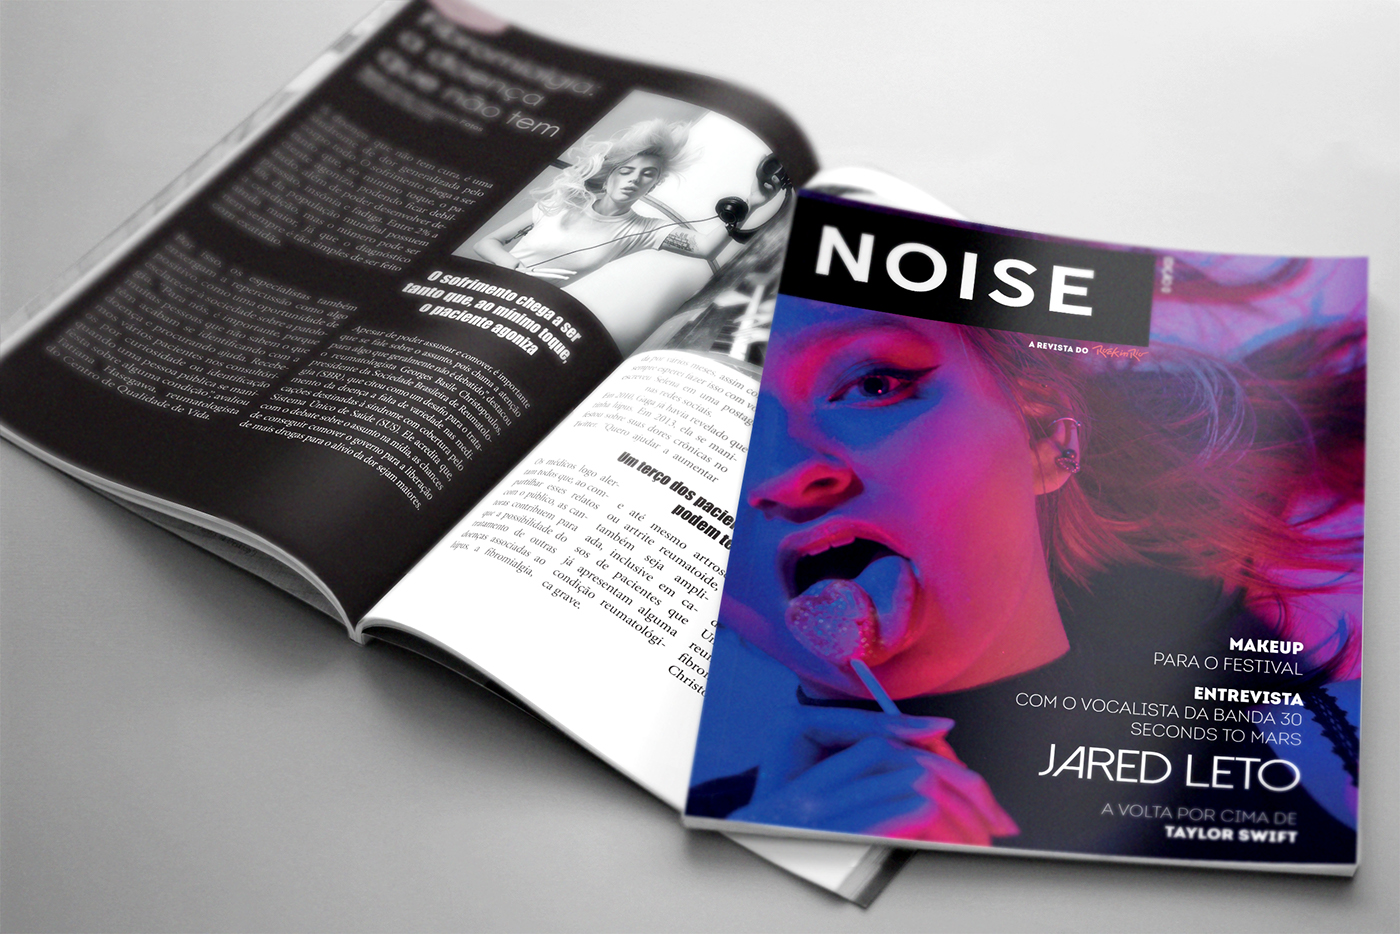 magazine noise revista Froot colorful InDesign editorial